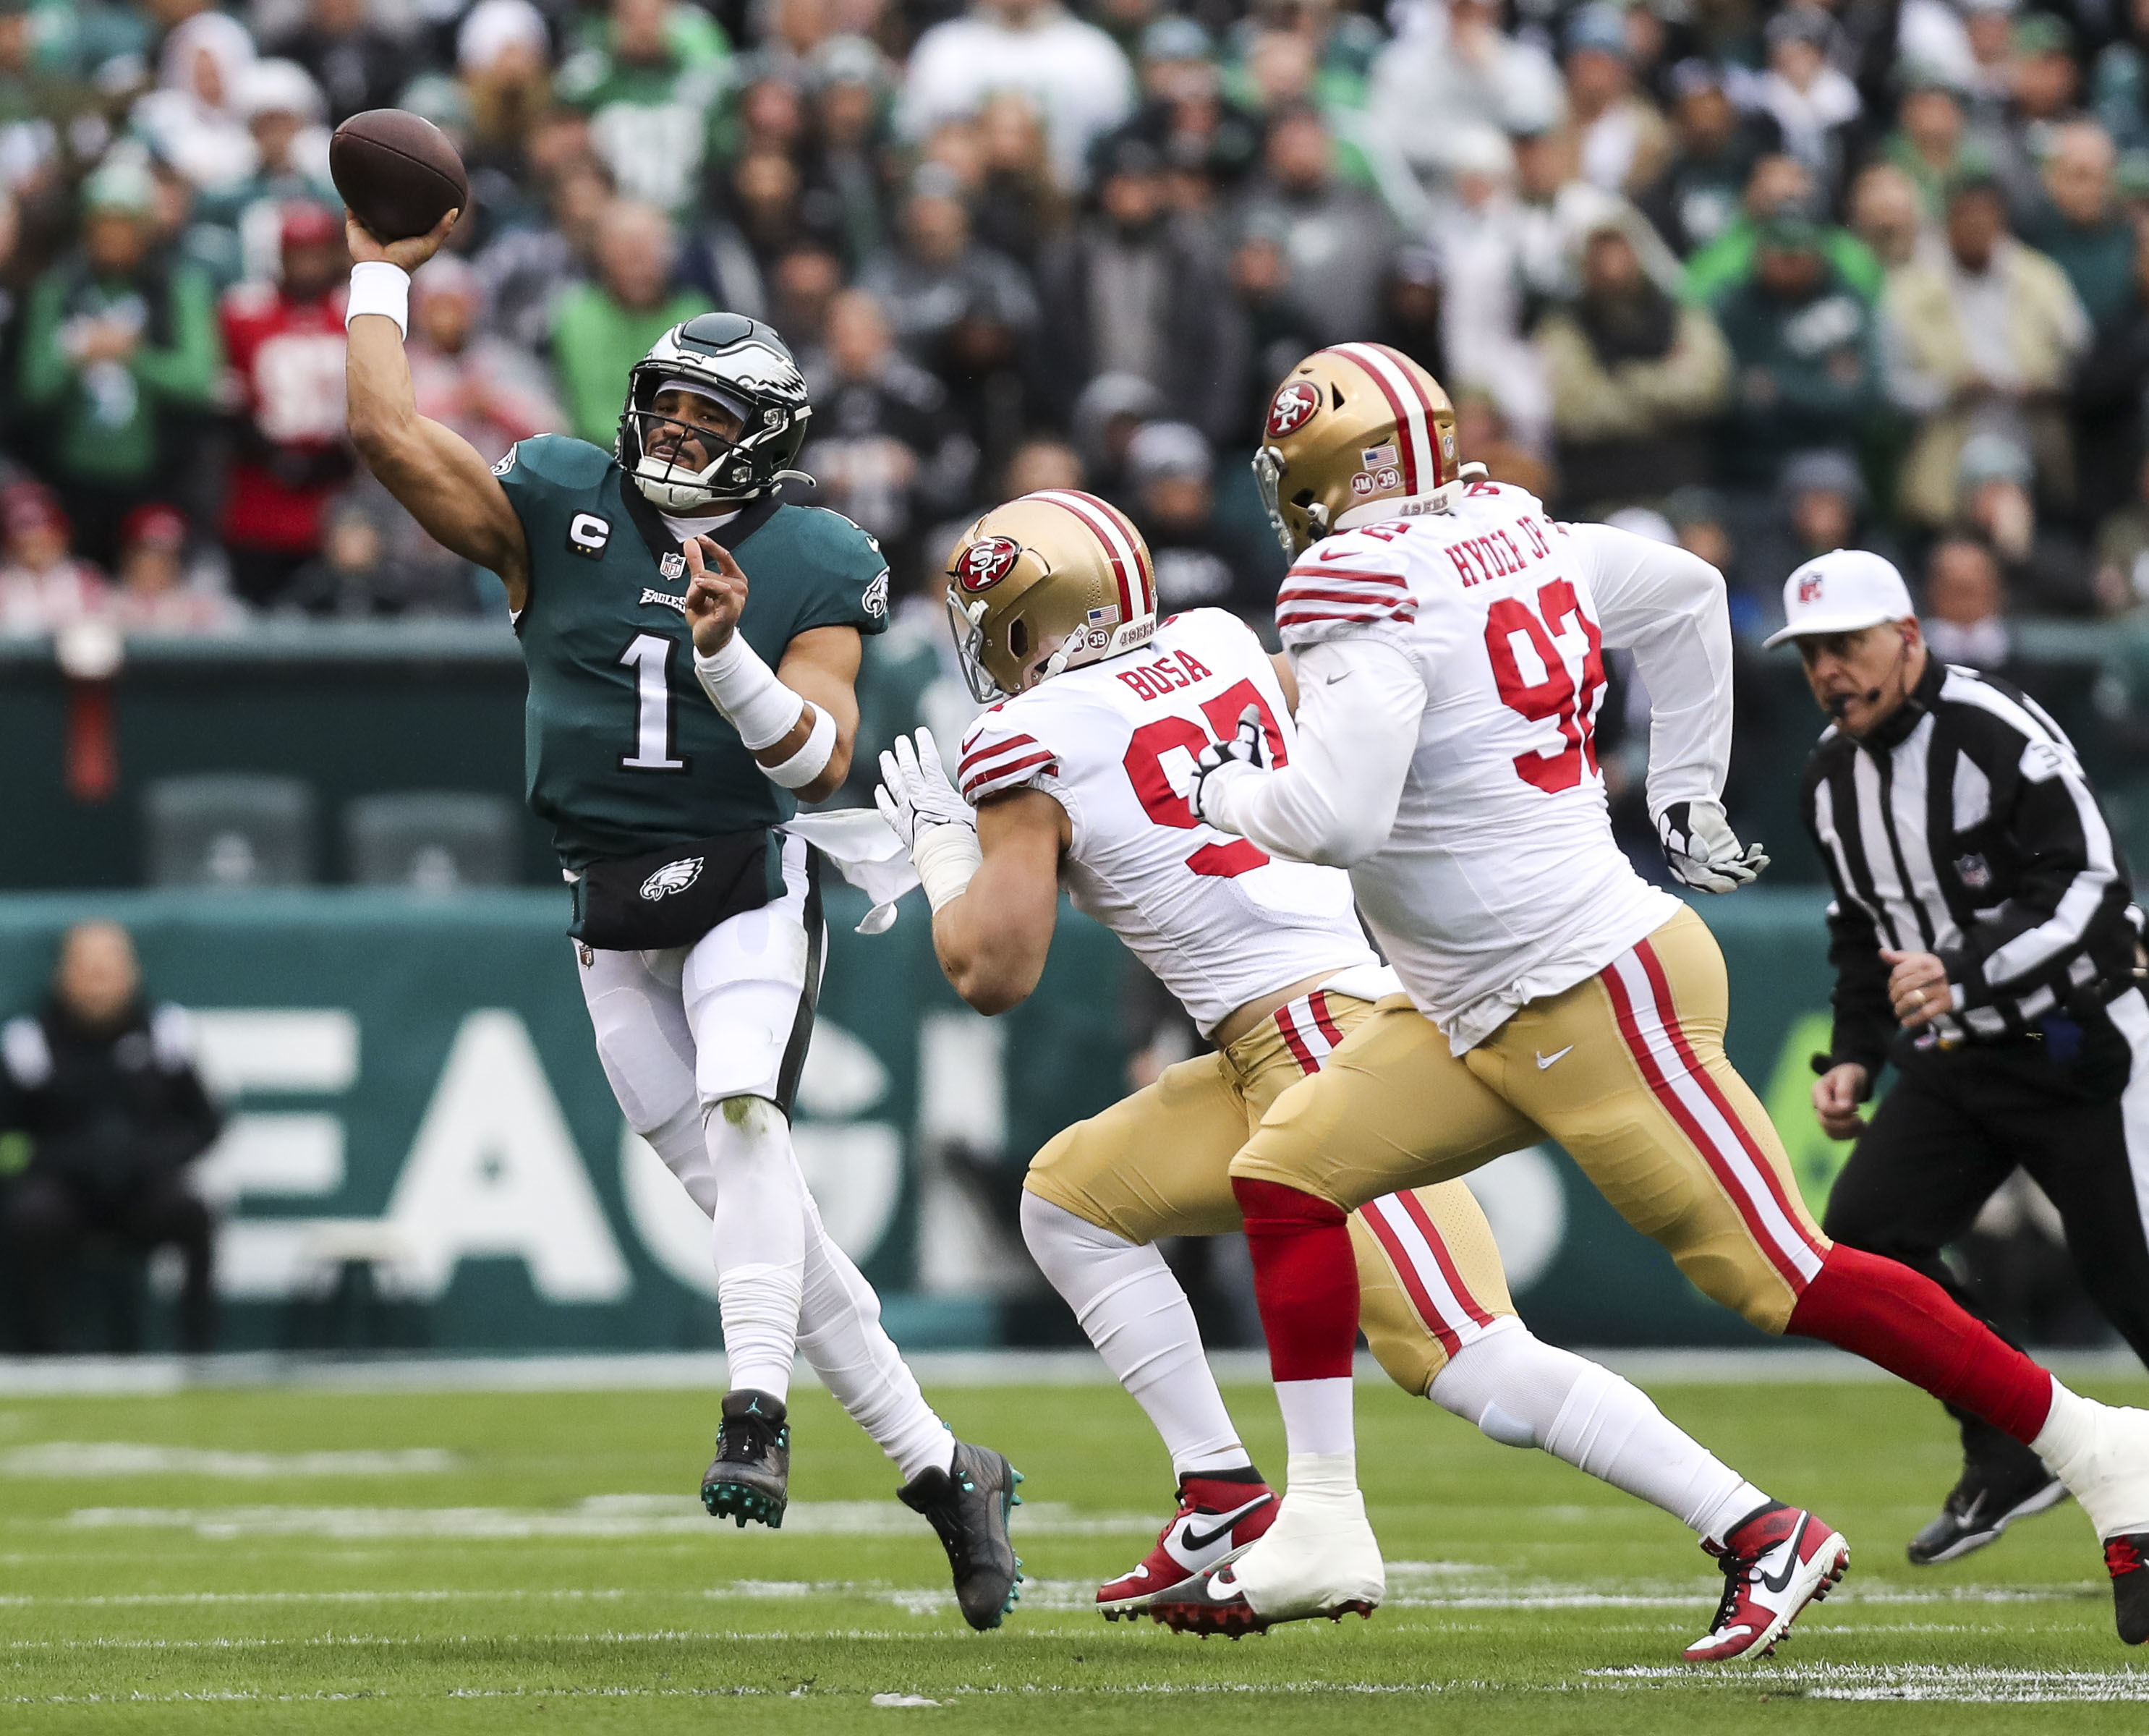 How to trash talk the San Francisco 49ers: A service guide for Eagles fans